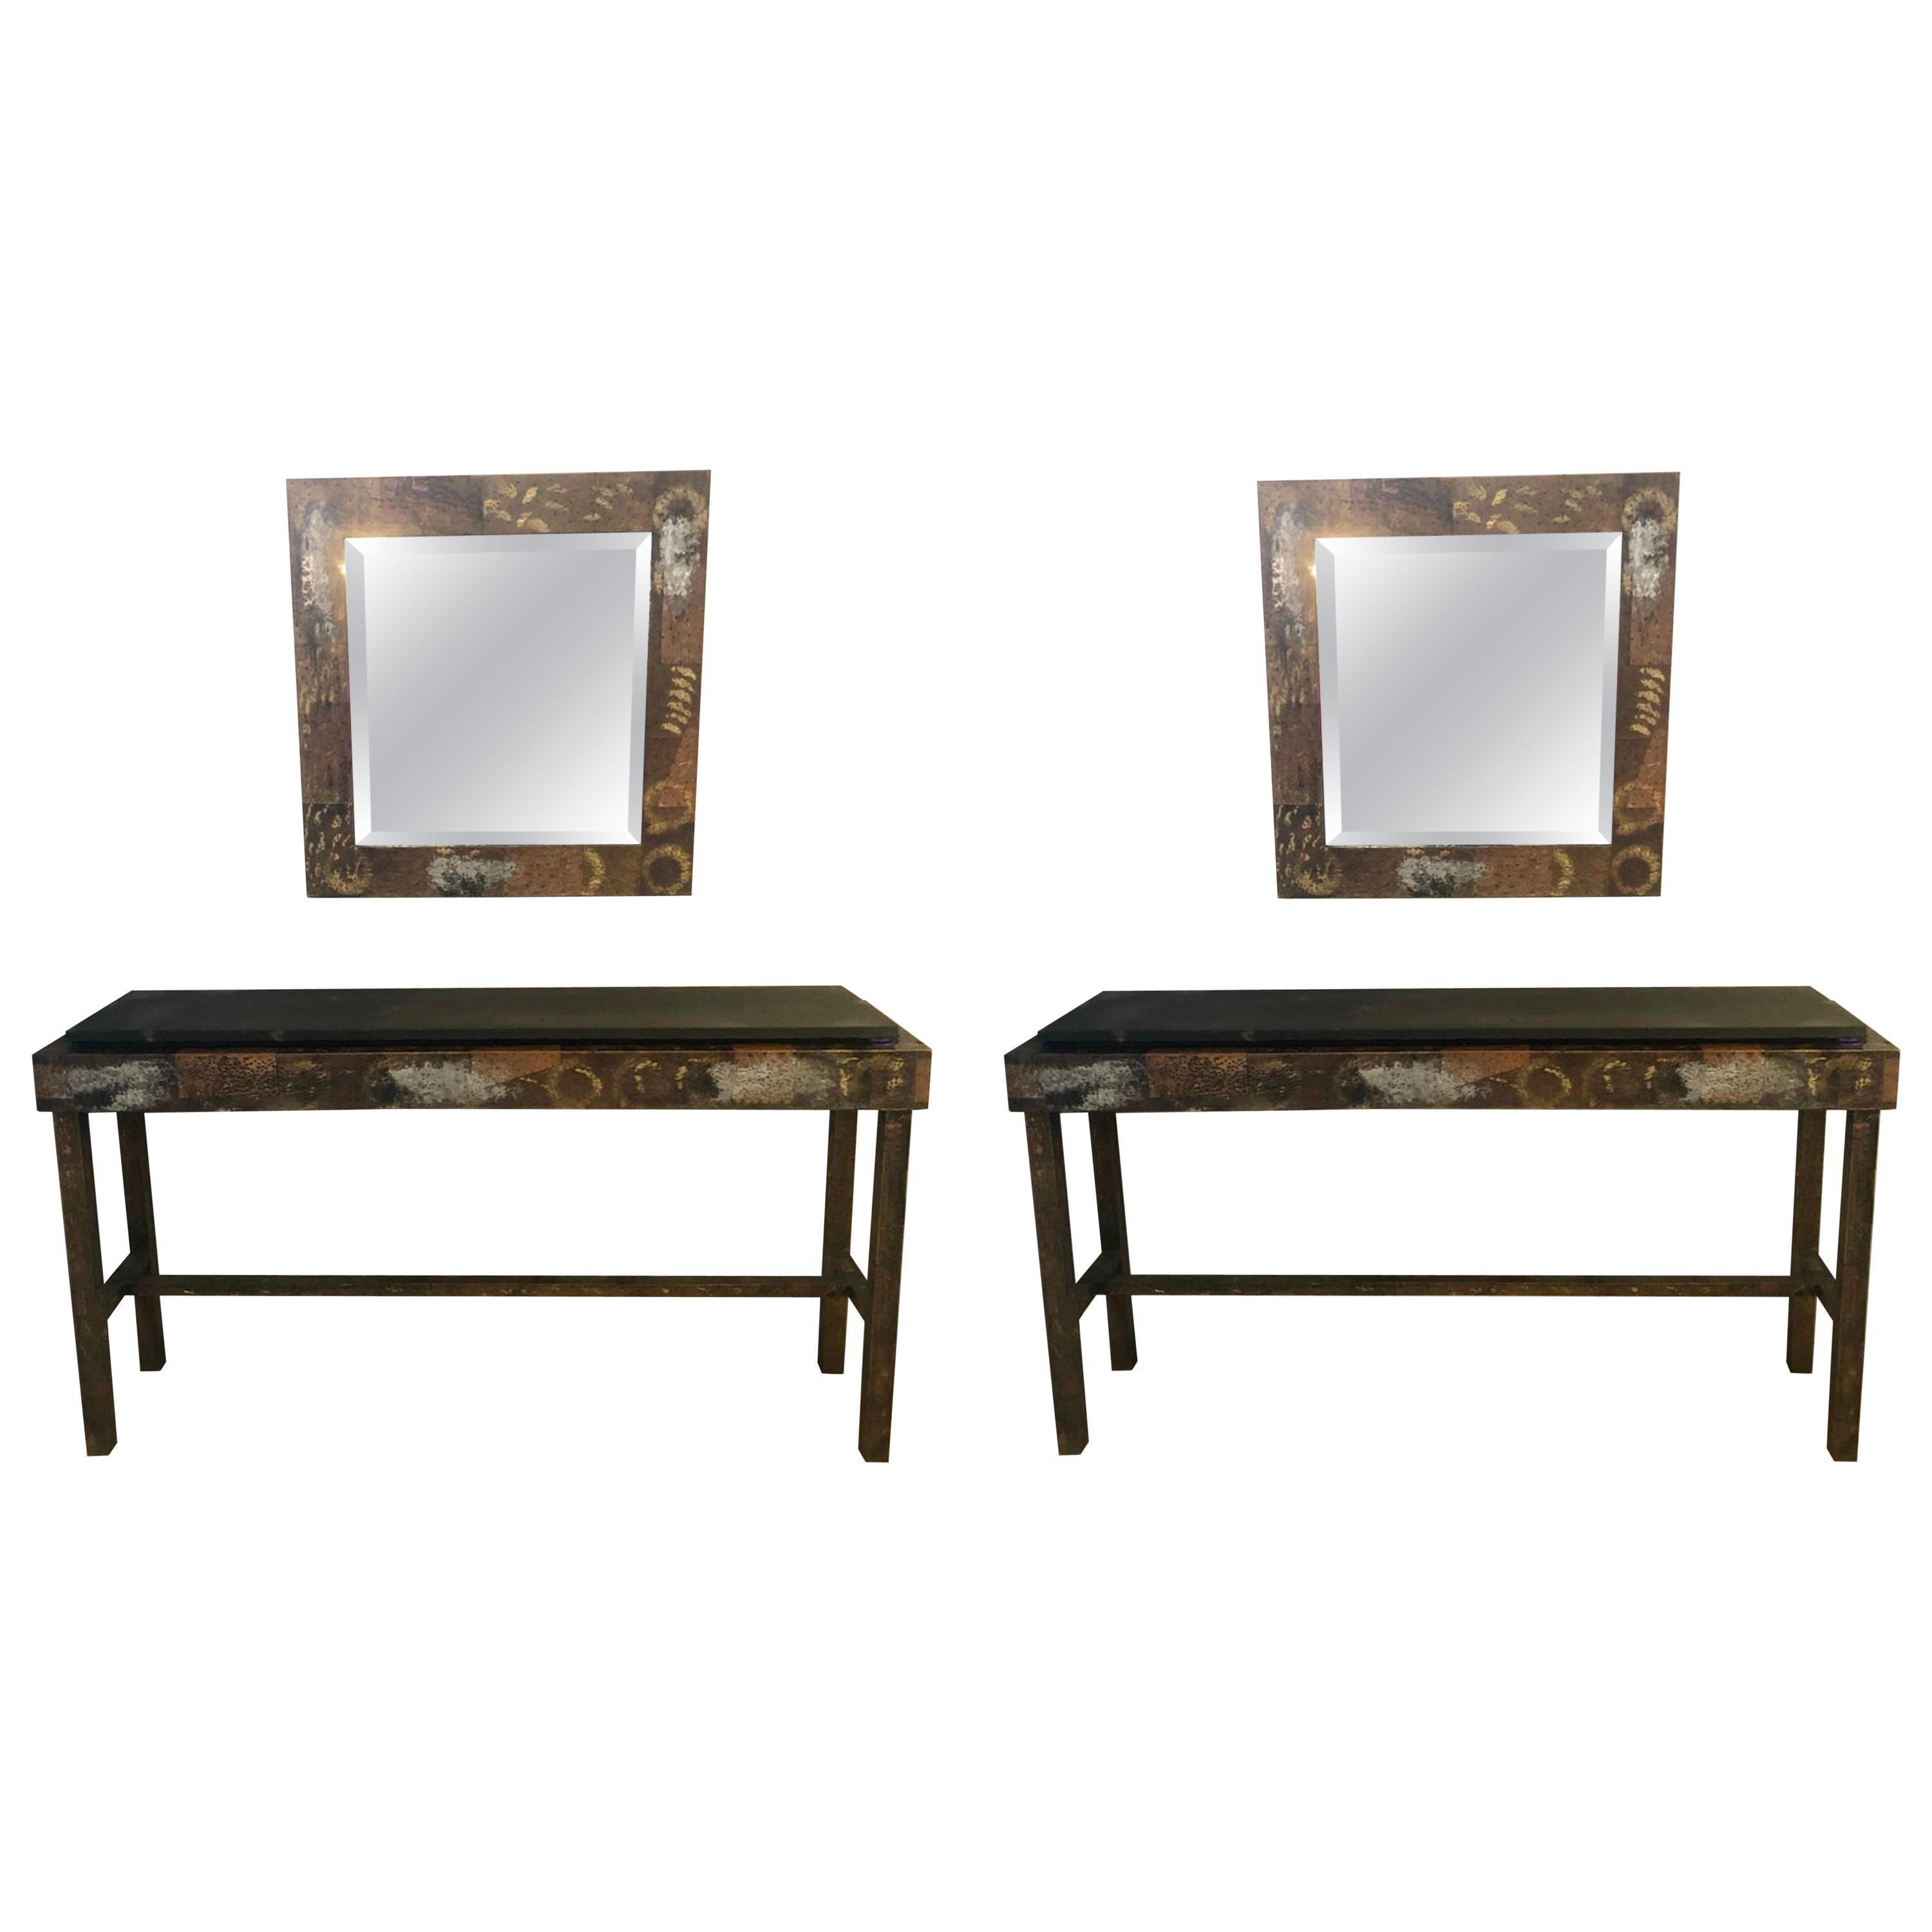 Paul Evans Style Patchwork Pair of Console Sofa Tables with Matching Mirrors